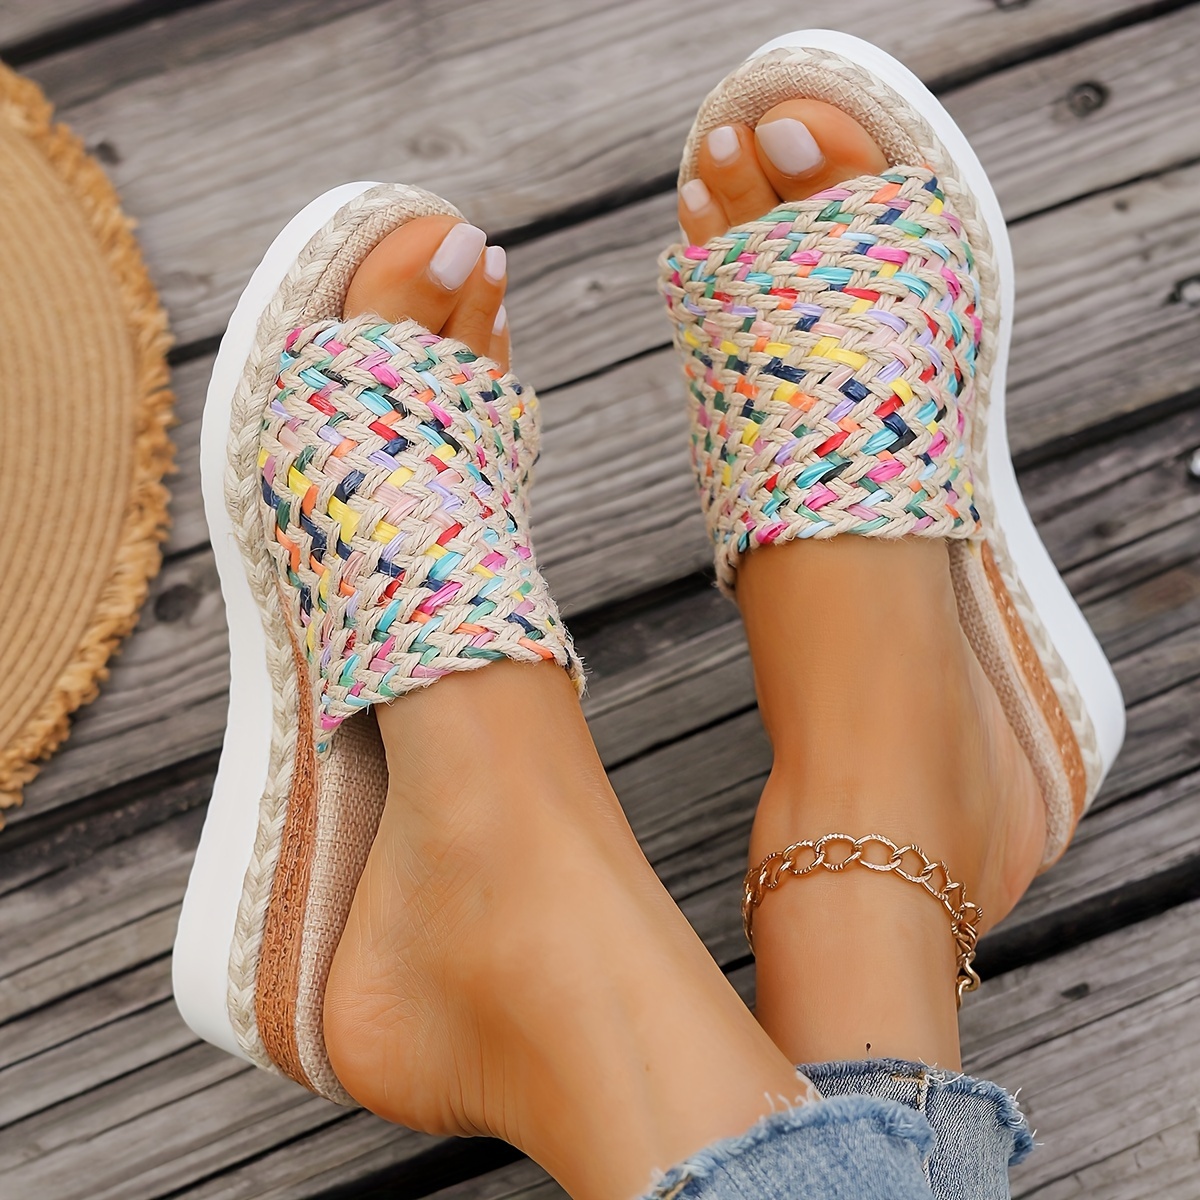 

Women's Colorful Woven Straw Sandals, Platform Slip On Summer Holiday Shoes, Comfort Wedge